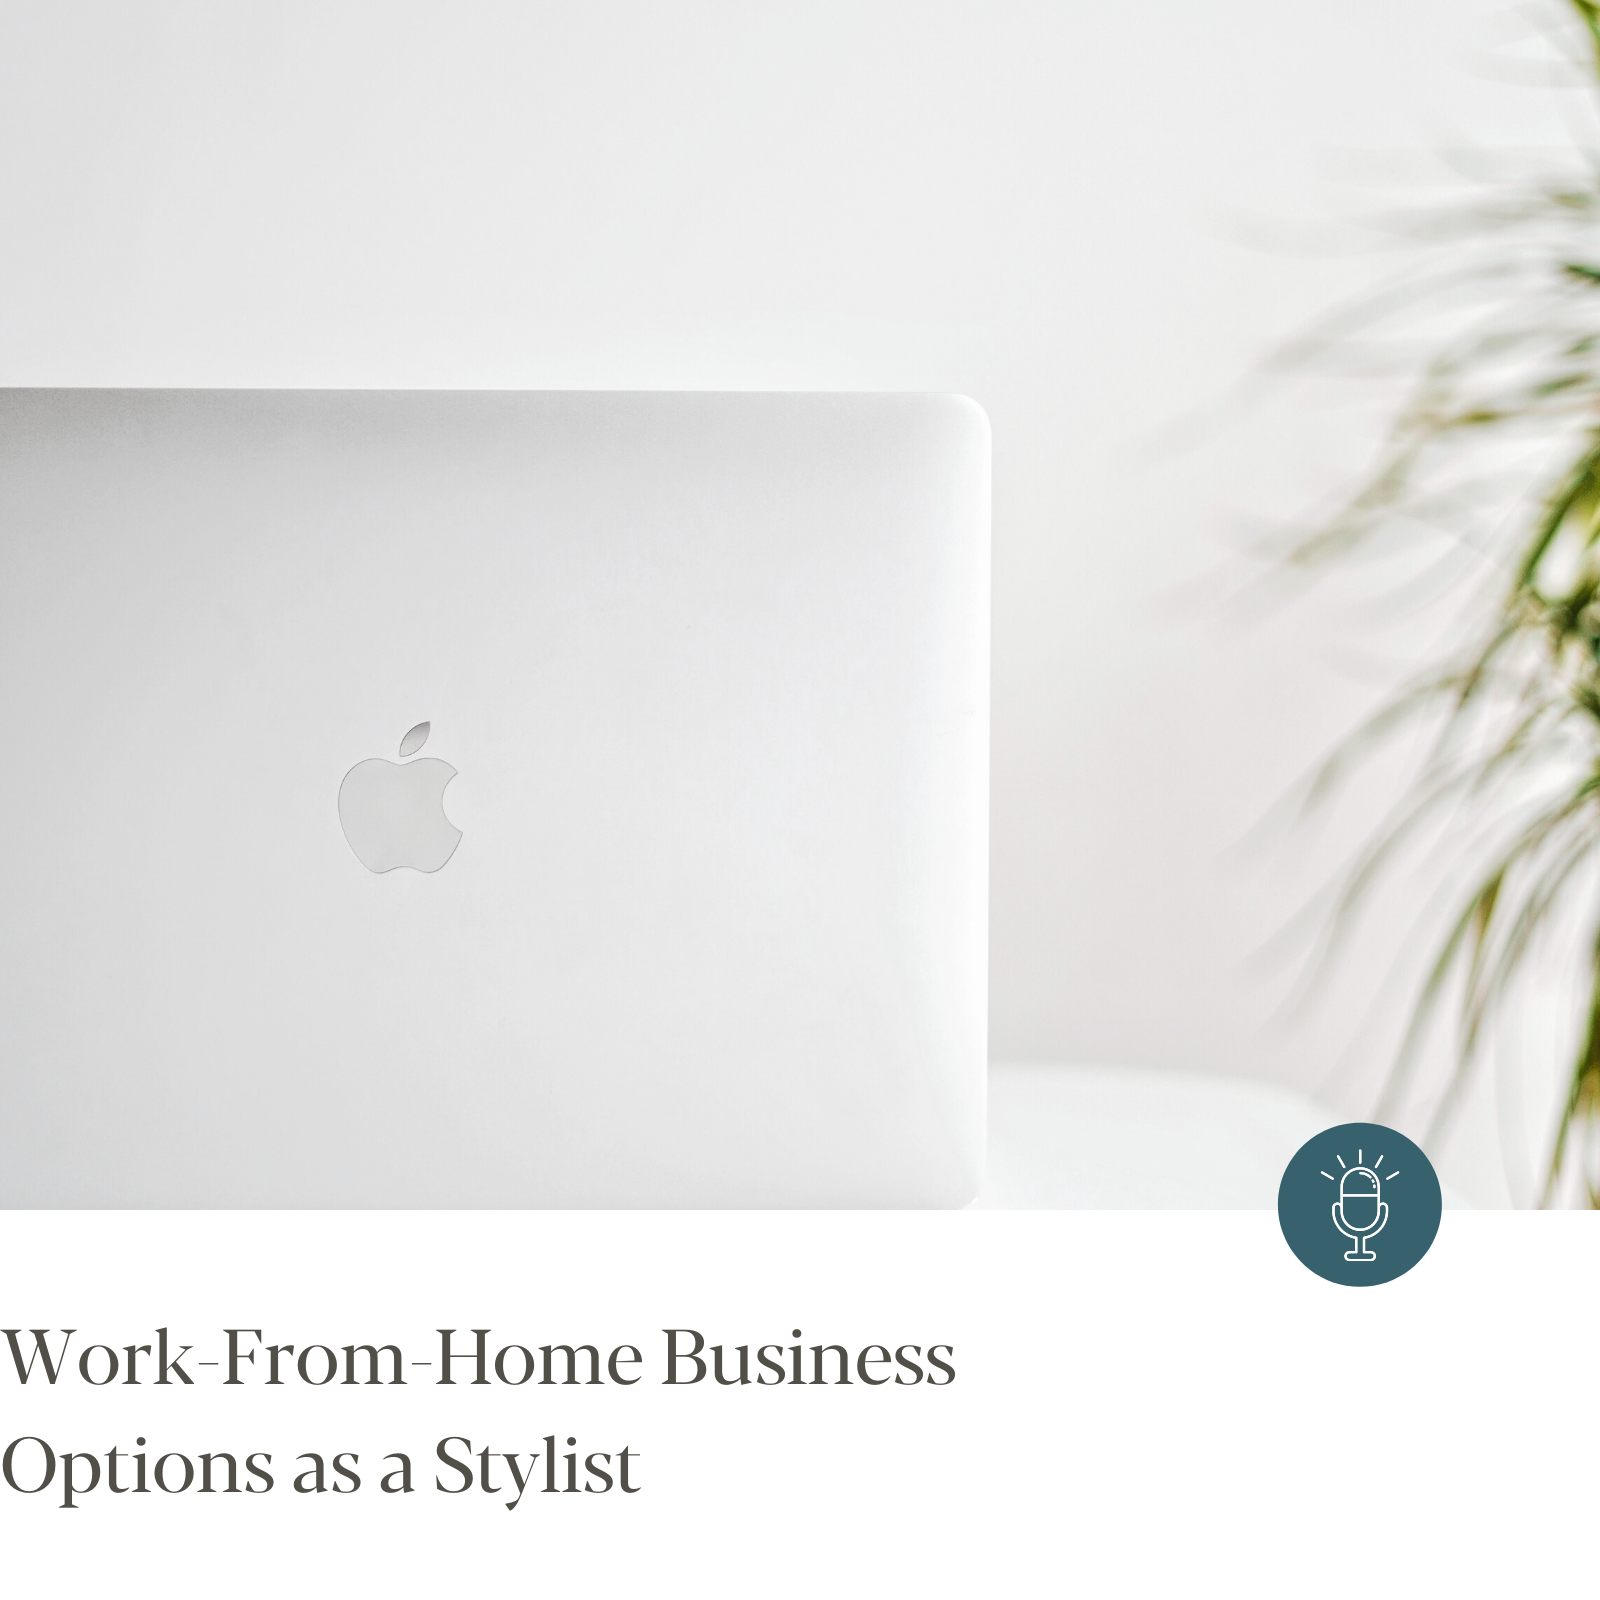 Episode #230 - Work-From-Home Business Options as a Stylist